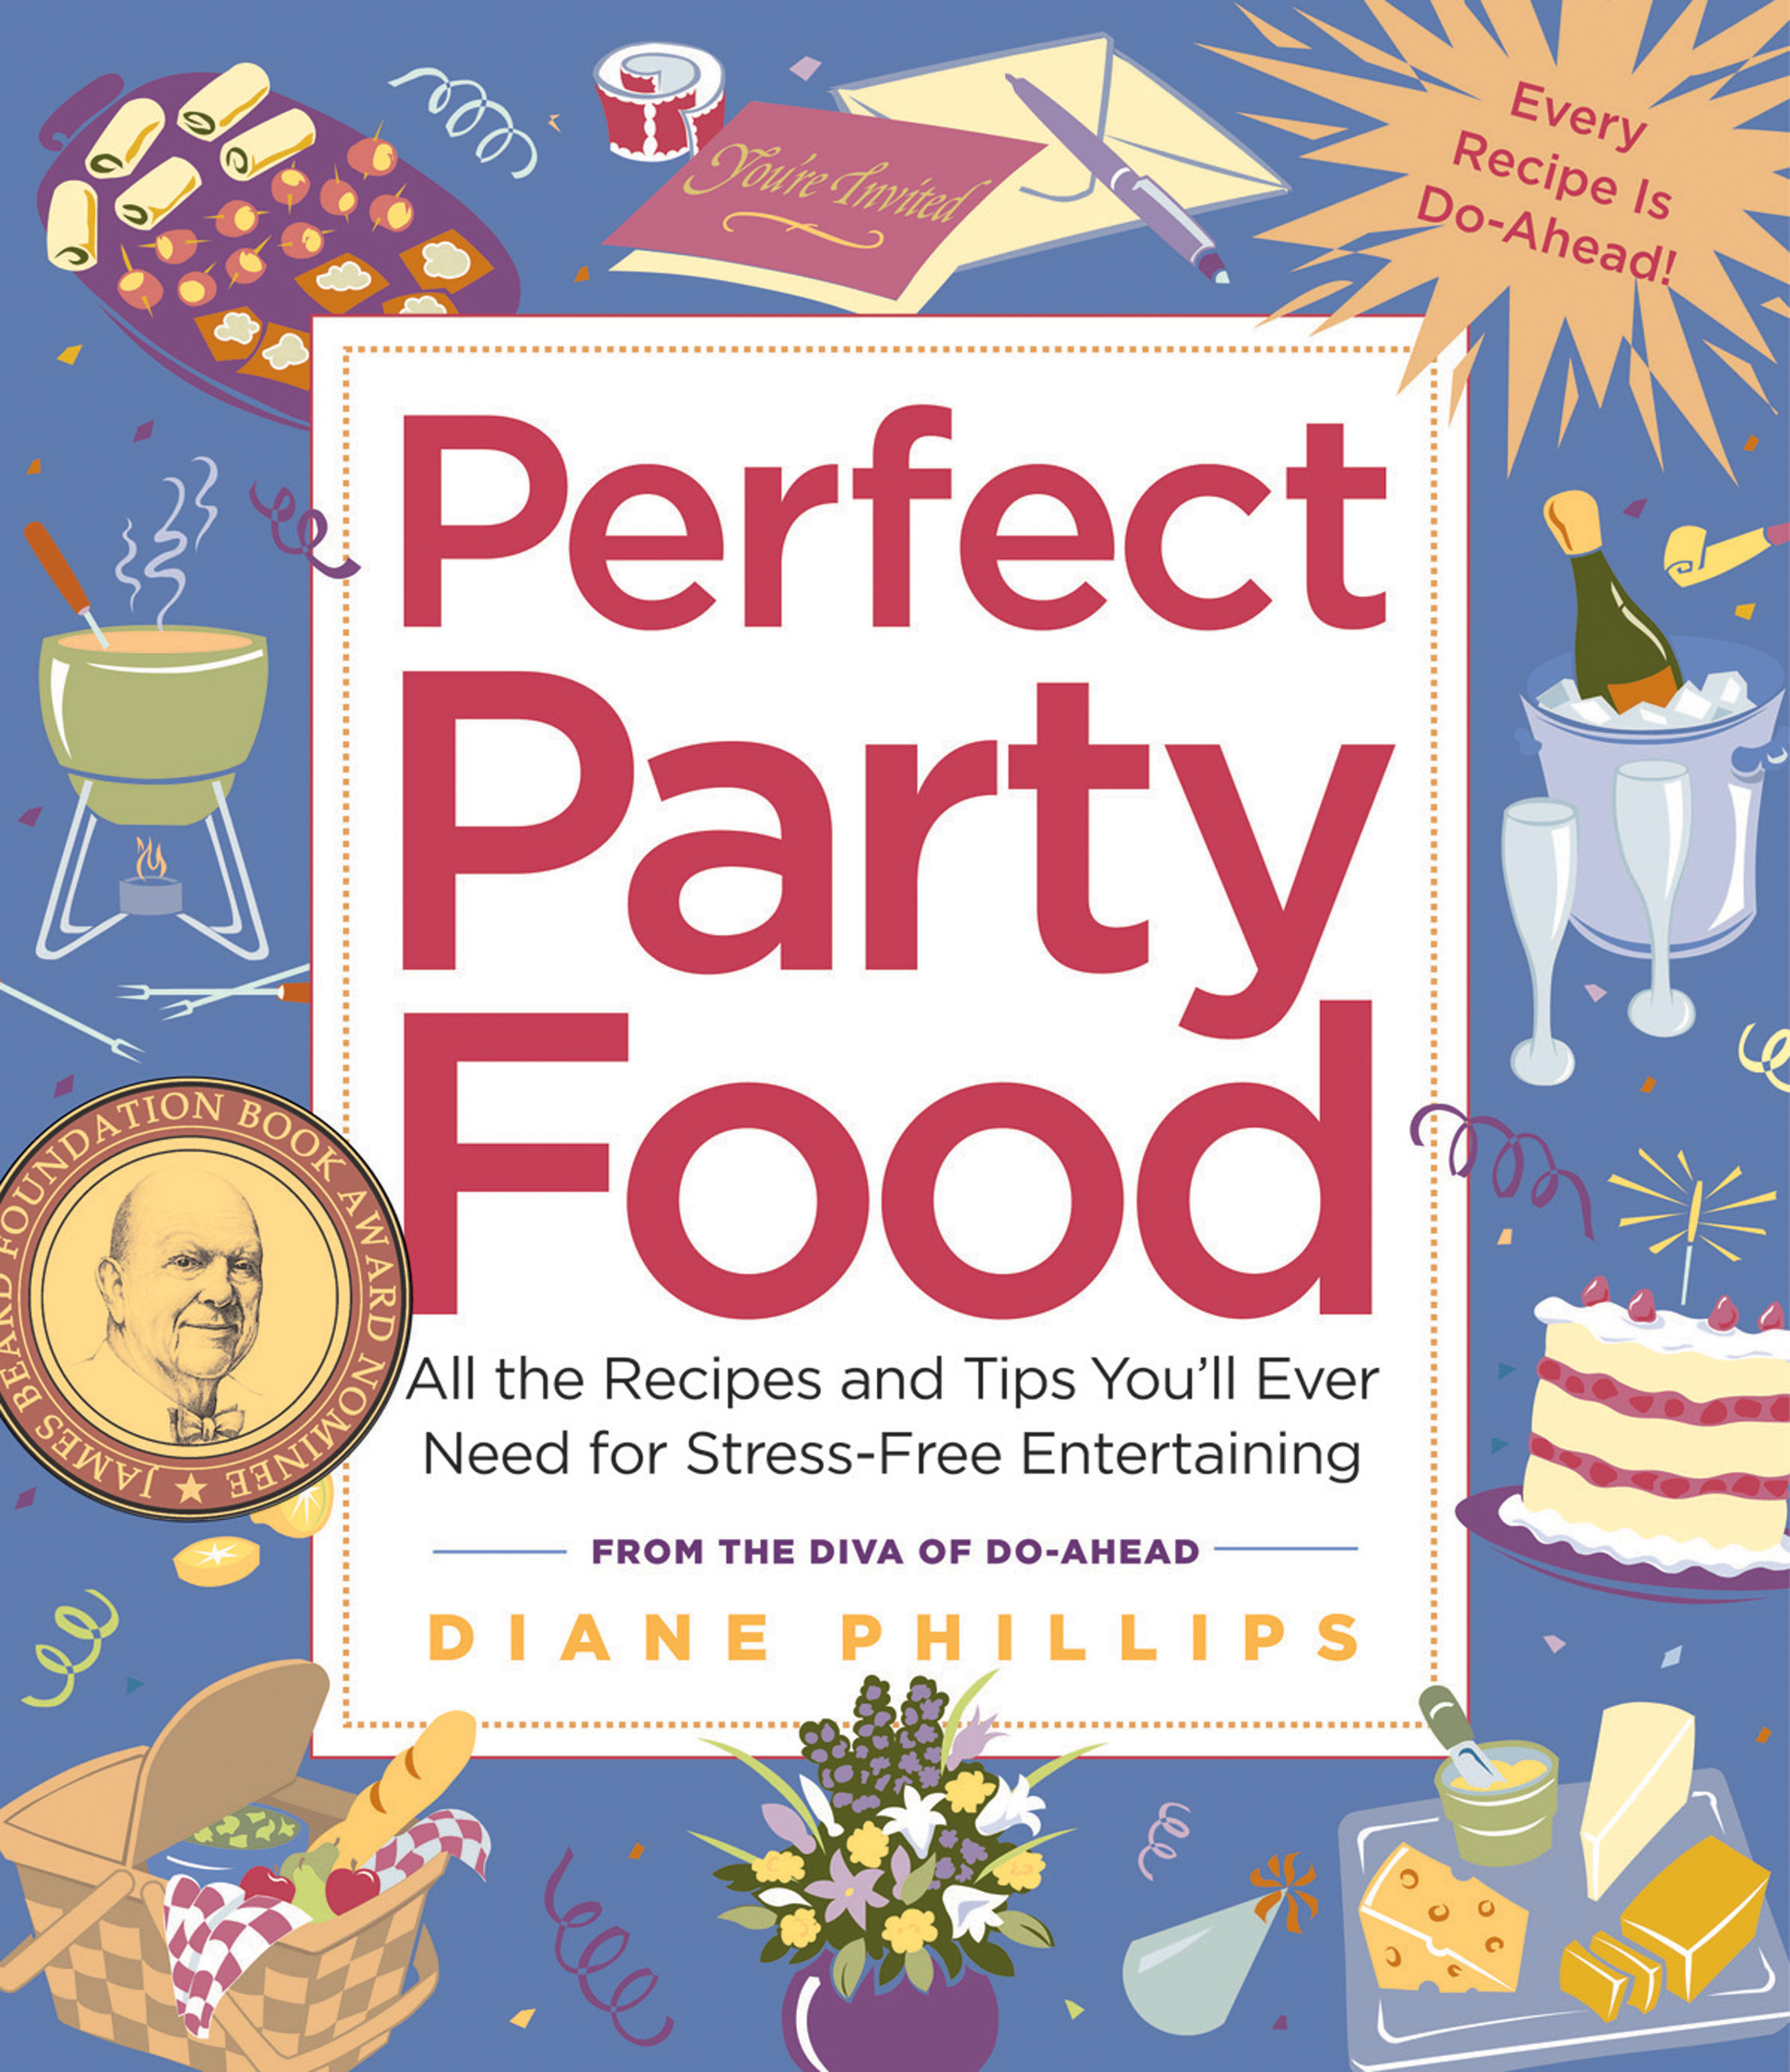 Imagen de portada para Perfect Party Food [electronic resource] : All the Recipes and Tips You'll Ever Need for Stress-Free Entertaining from the Diva of Do-Ahead